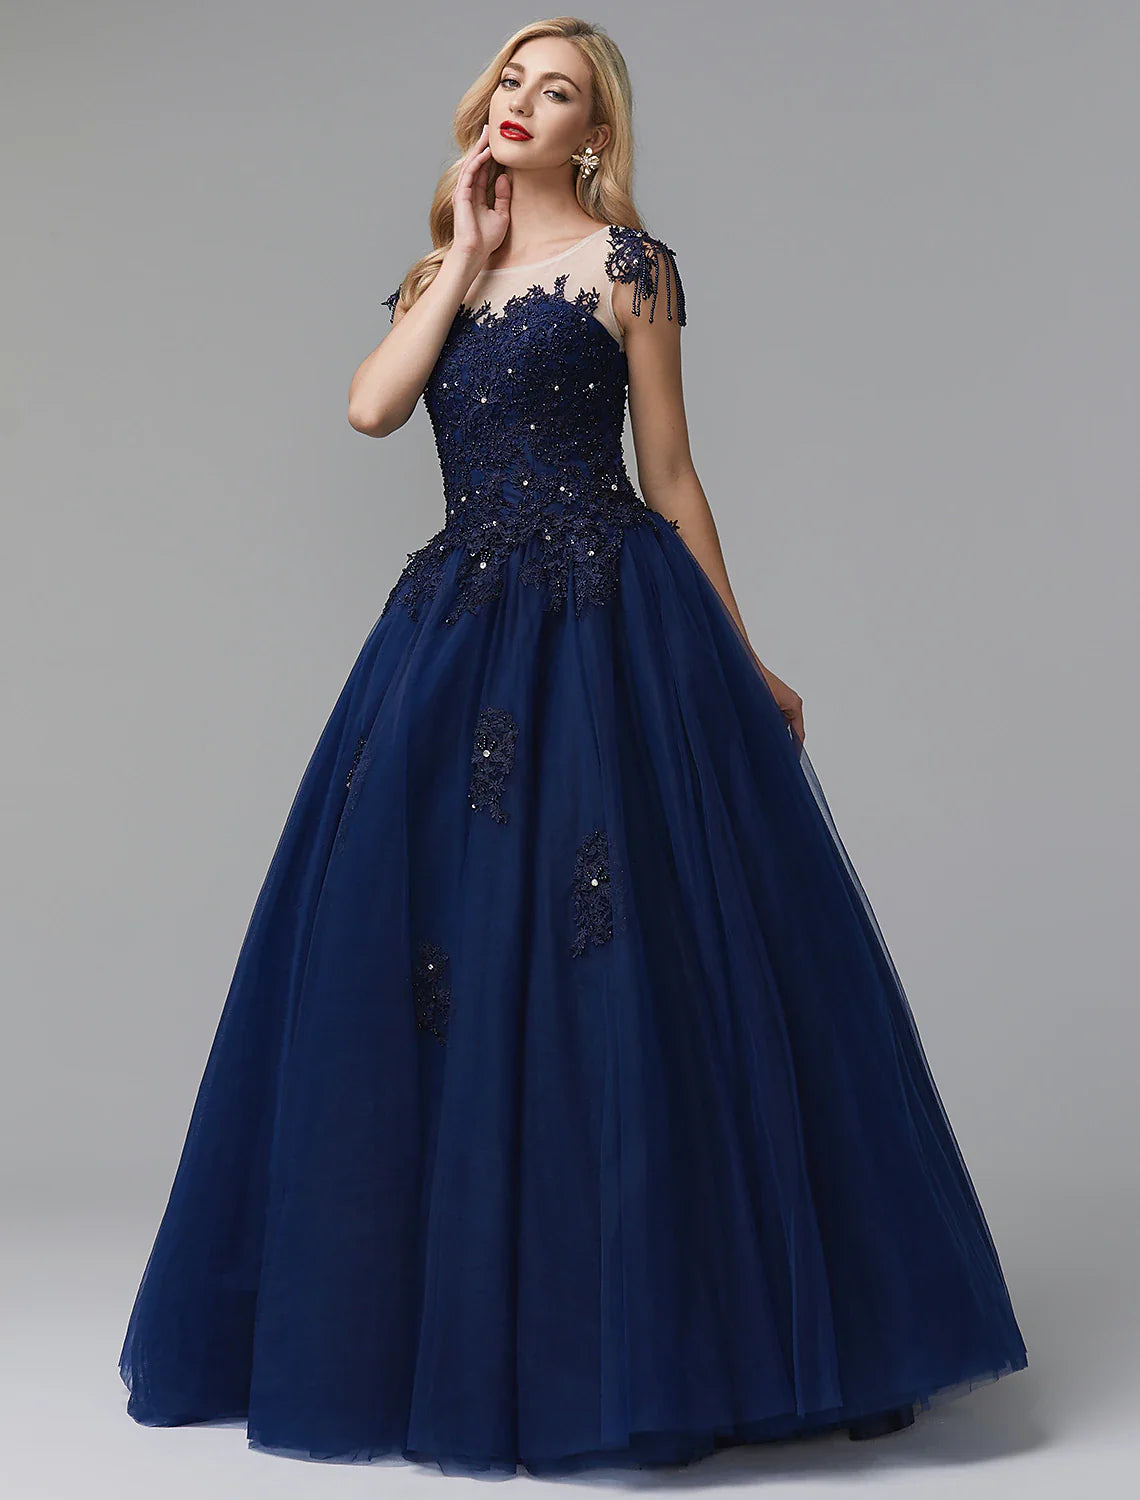 Ball Gown Prom Dresses Sparkle Dress Quinceanera Prom Chapel Train Long Sleeve Off Shoulder Satin with Beading Appliques